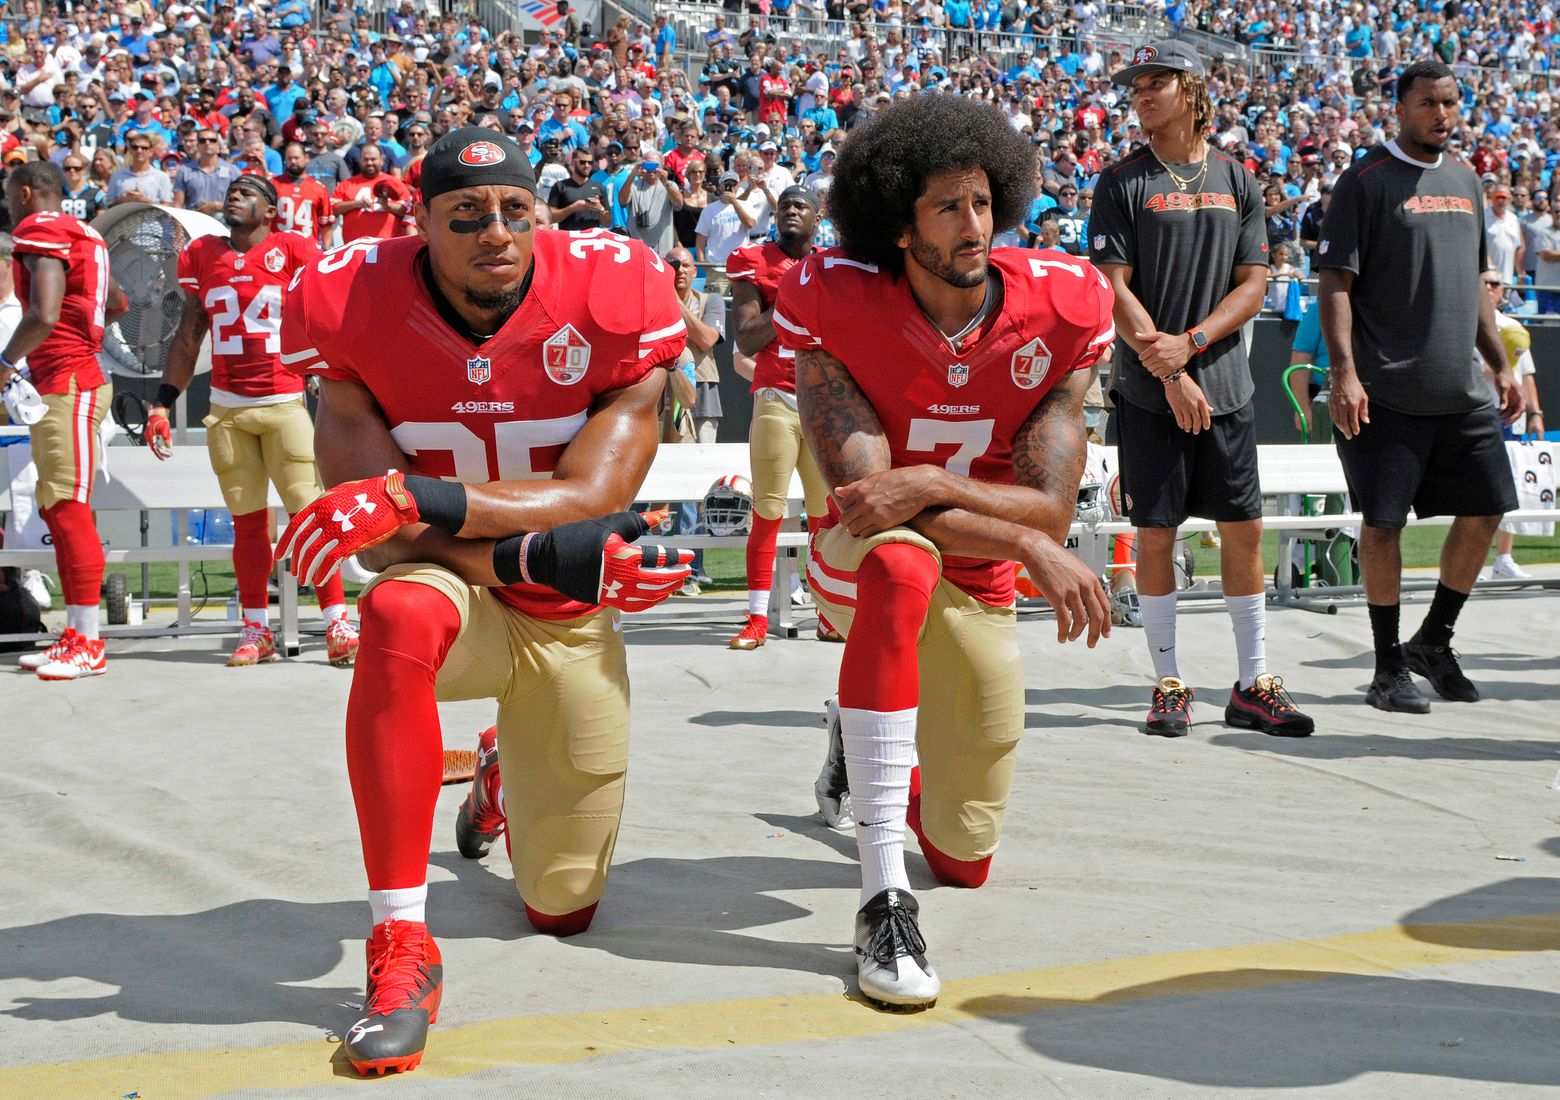 Is it time for white NFL players to take a knee during national anthem